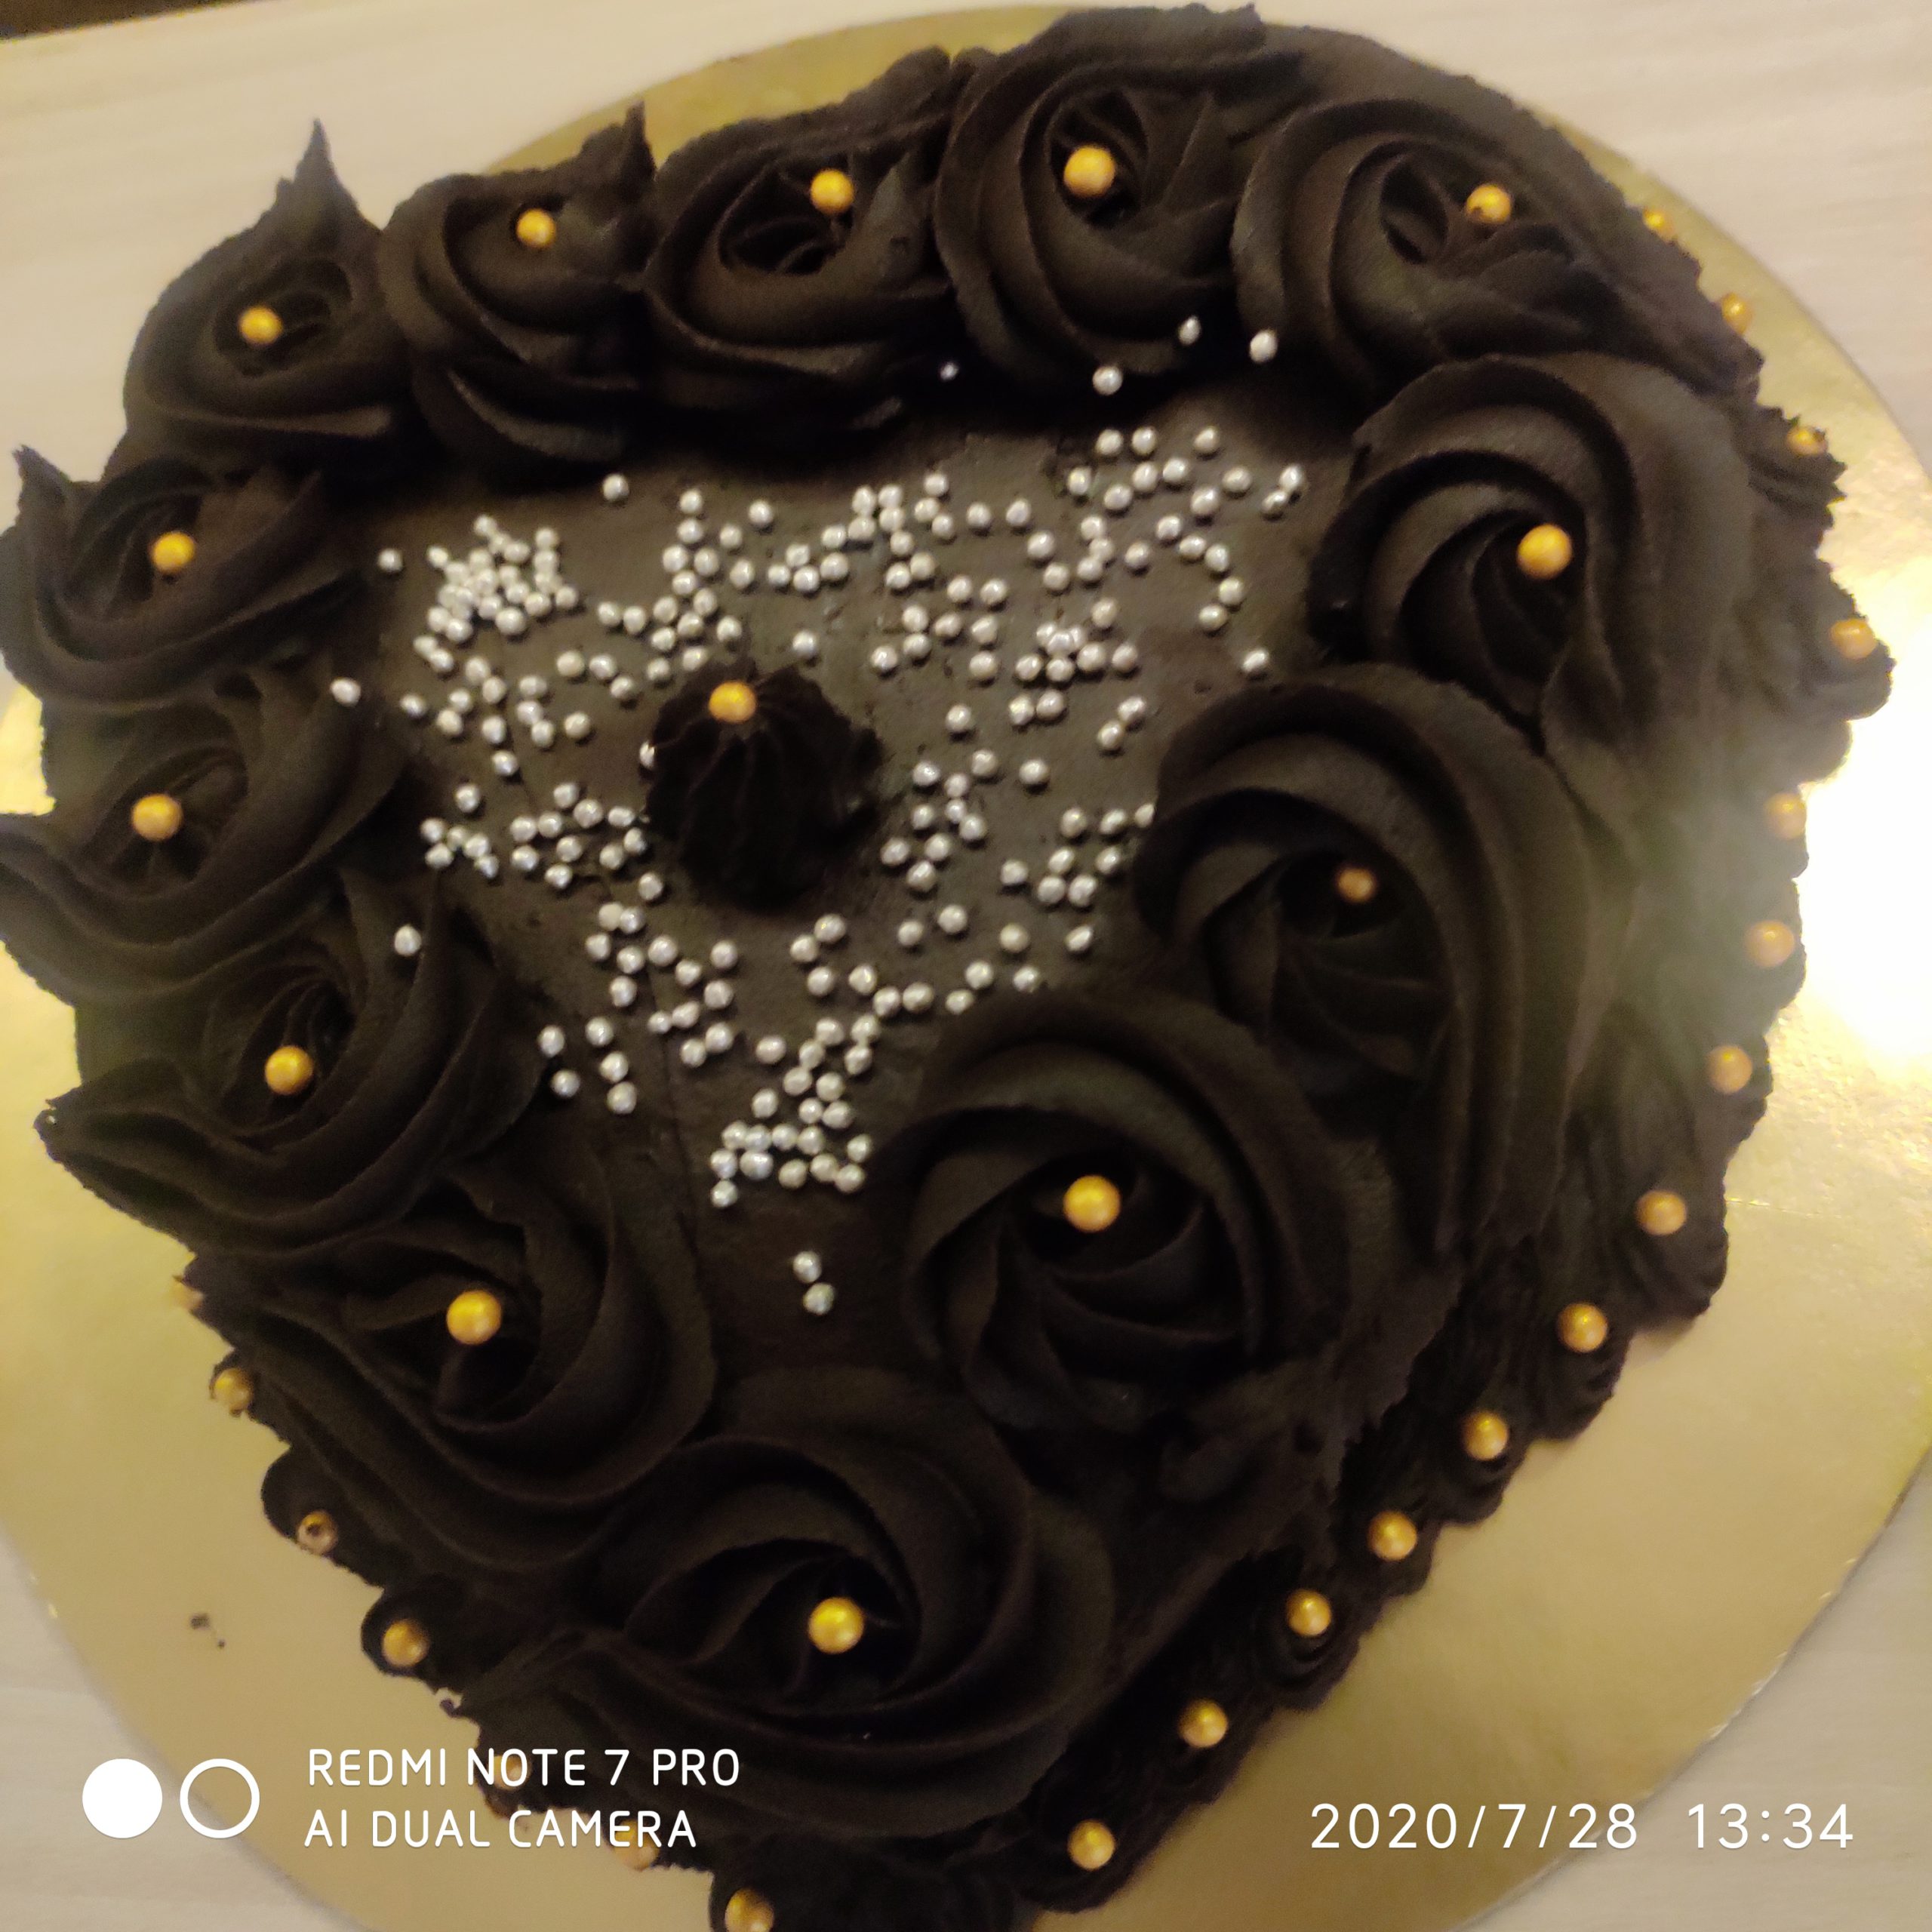 Chocolate Heart Cake Designs, Images, Price Near Me